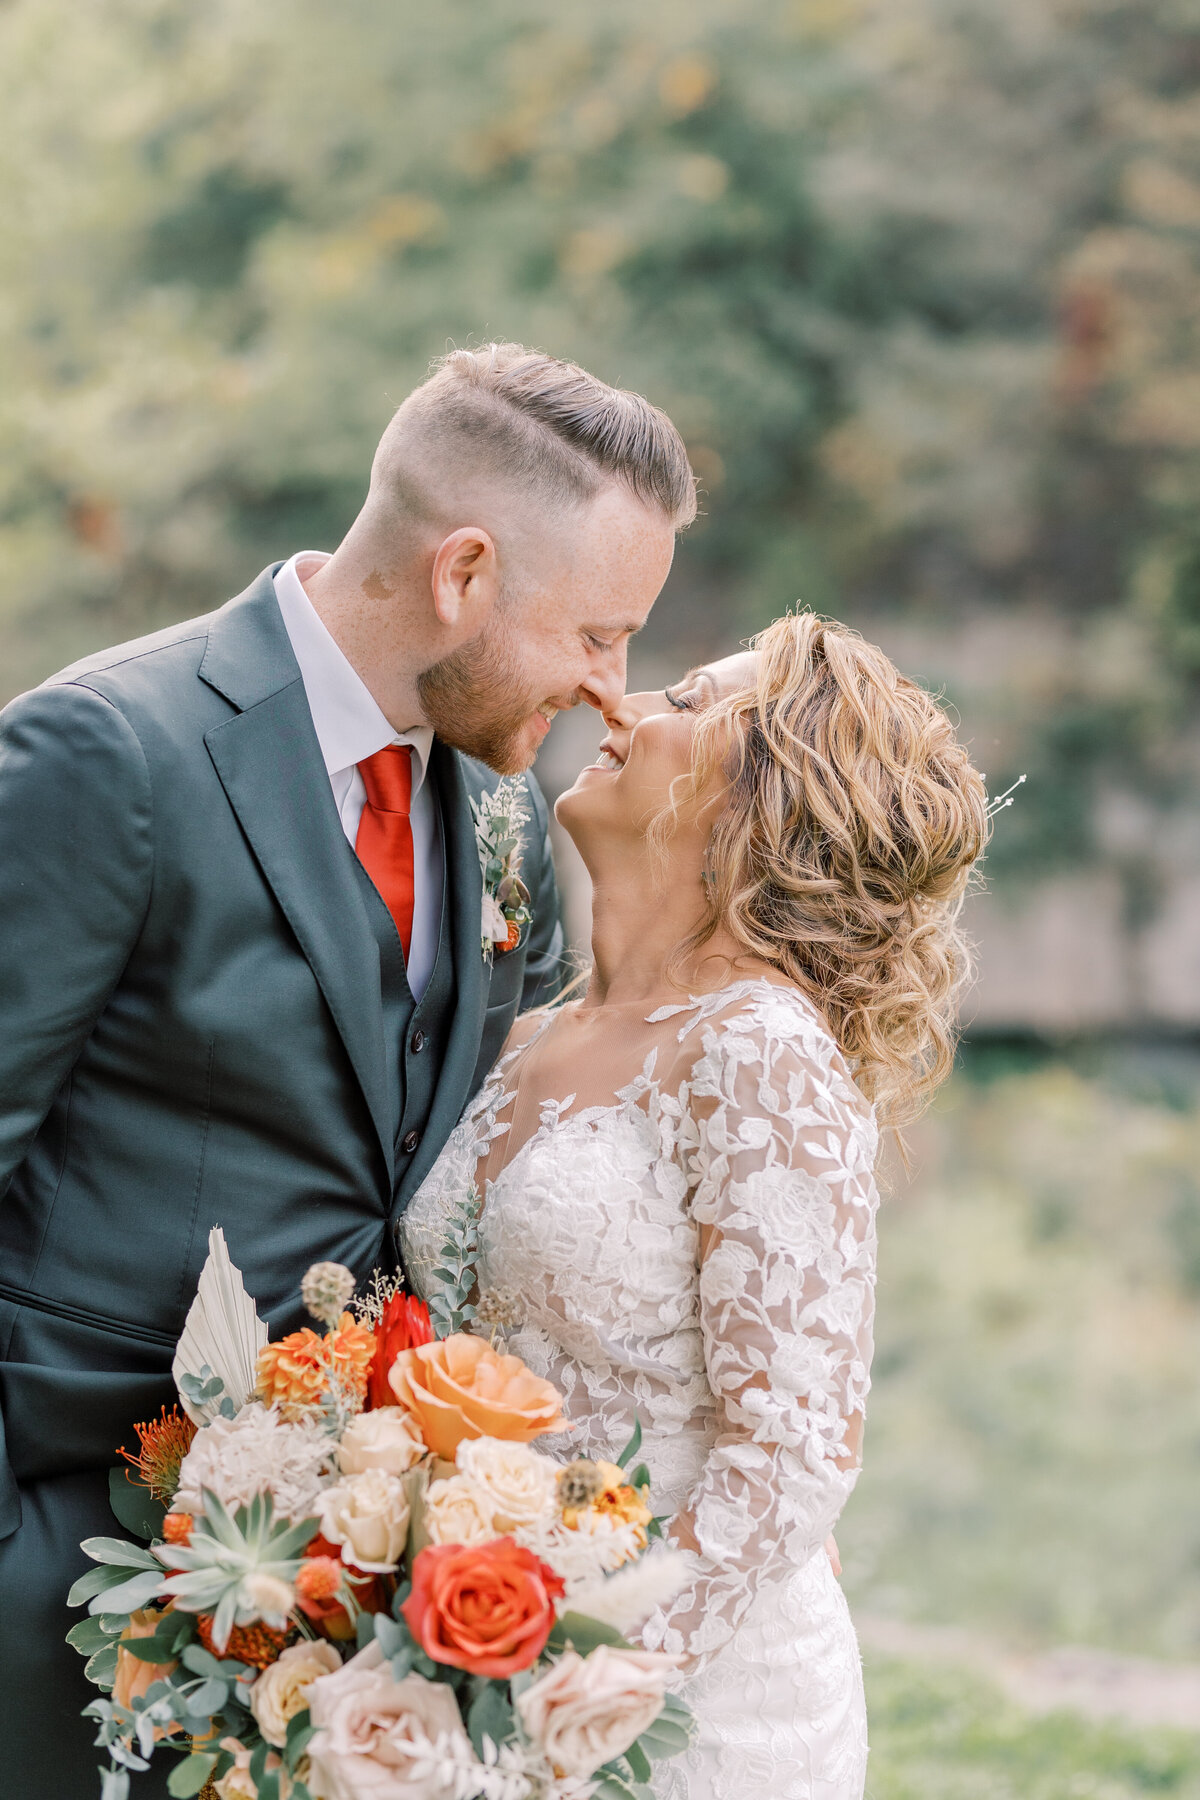 A man in a green suit and a bride in a long sleeve lace gown press noses together while holding an orange, white, and cream bouquet with succulents on their wedding day.